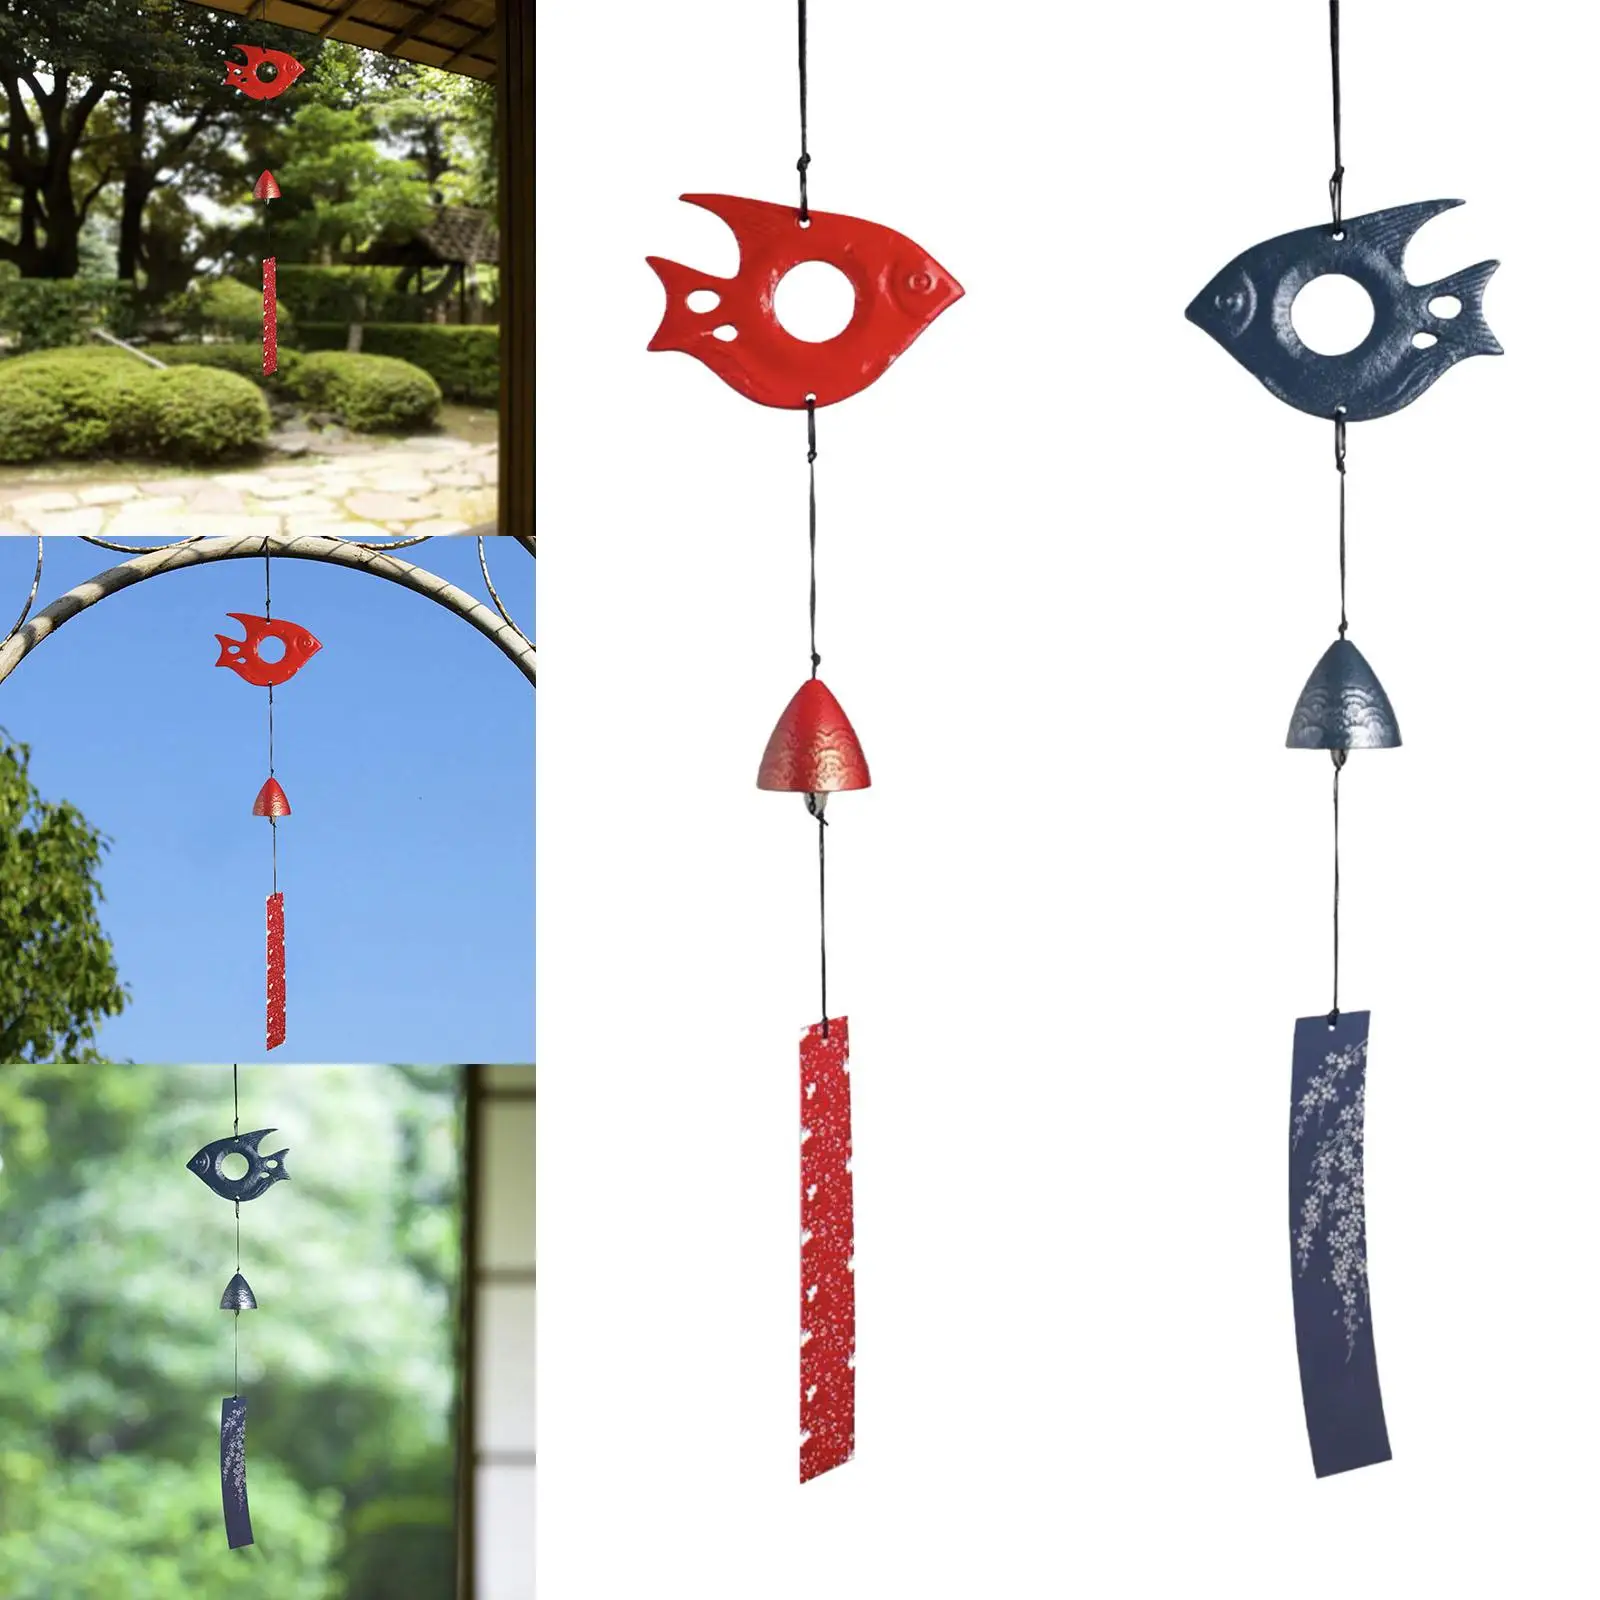 Iron Wind Chimes Hanging Bell Fish Figure Decorative Garden Windchime Pendant for Windows Patio Home Outside Festival Gifts